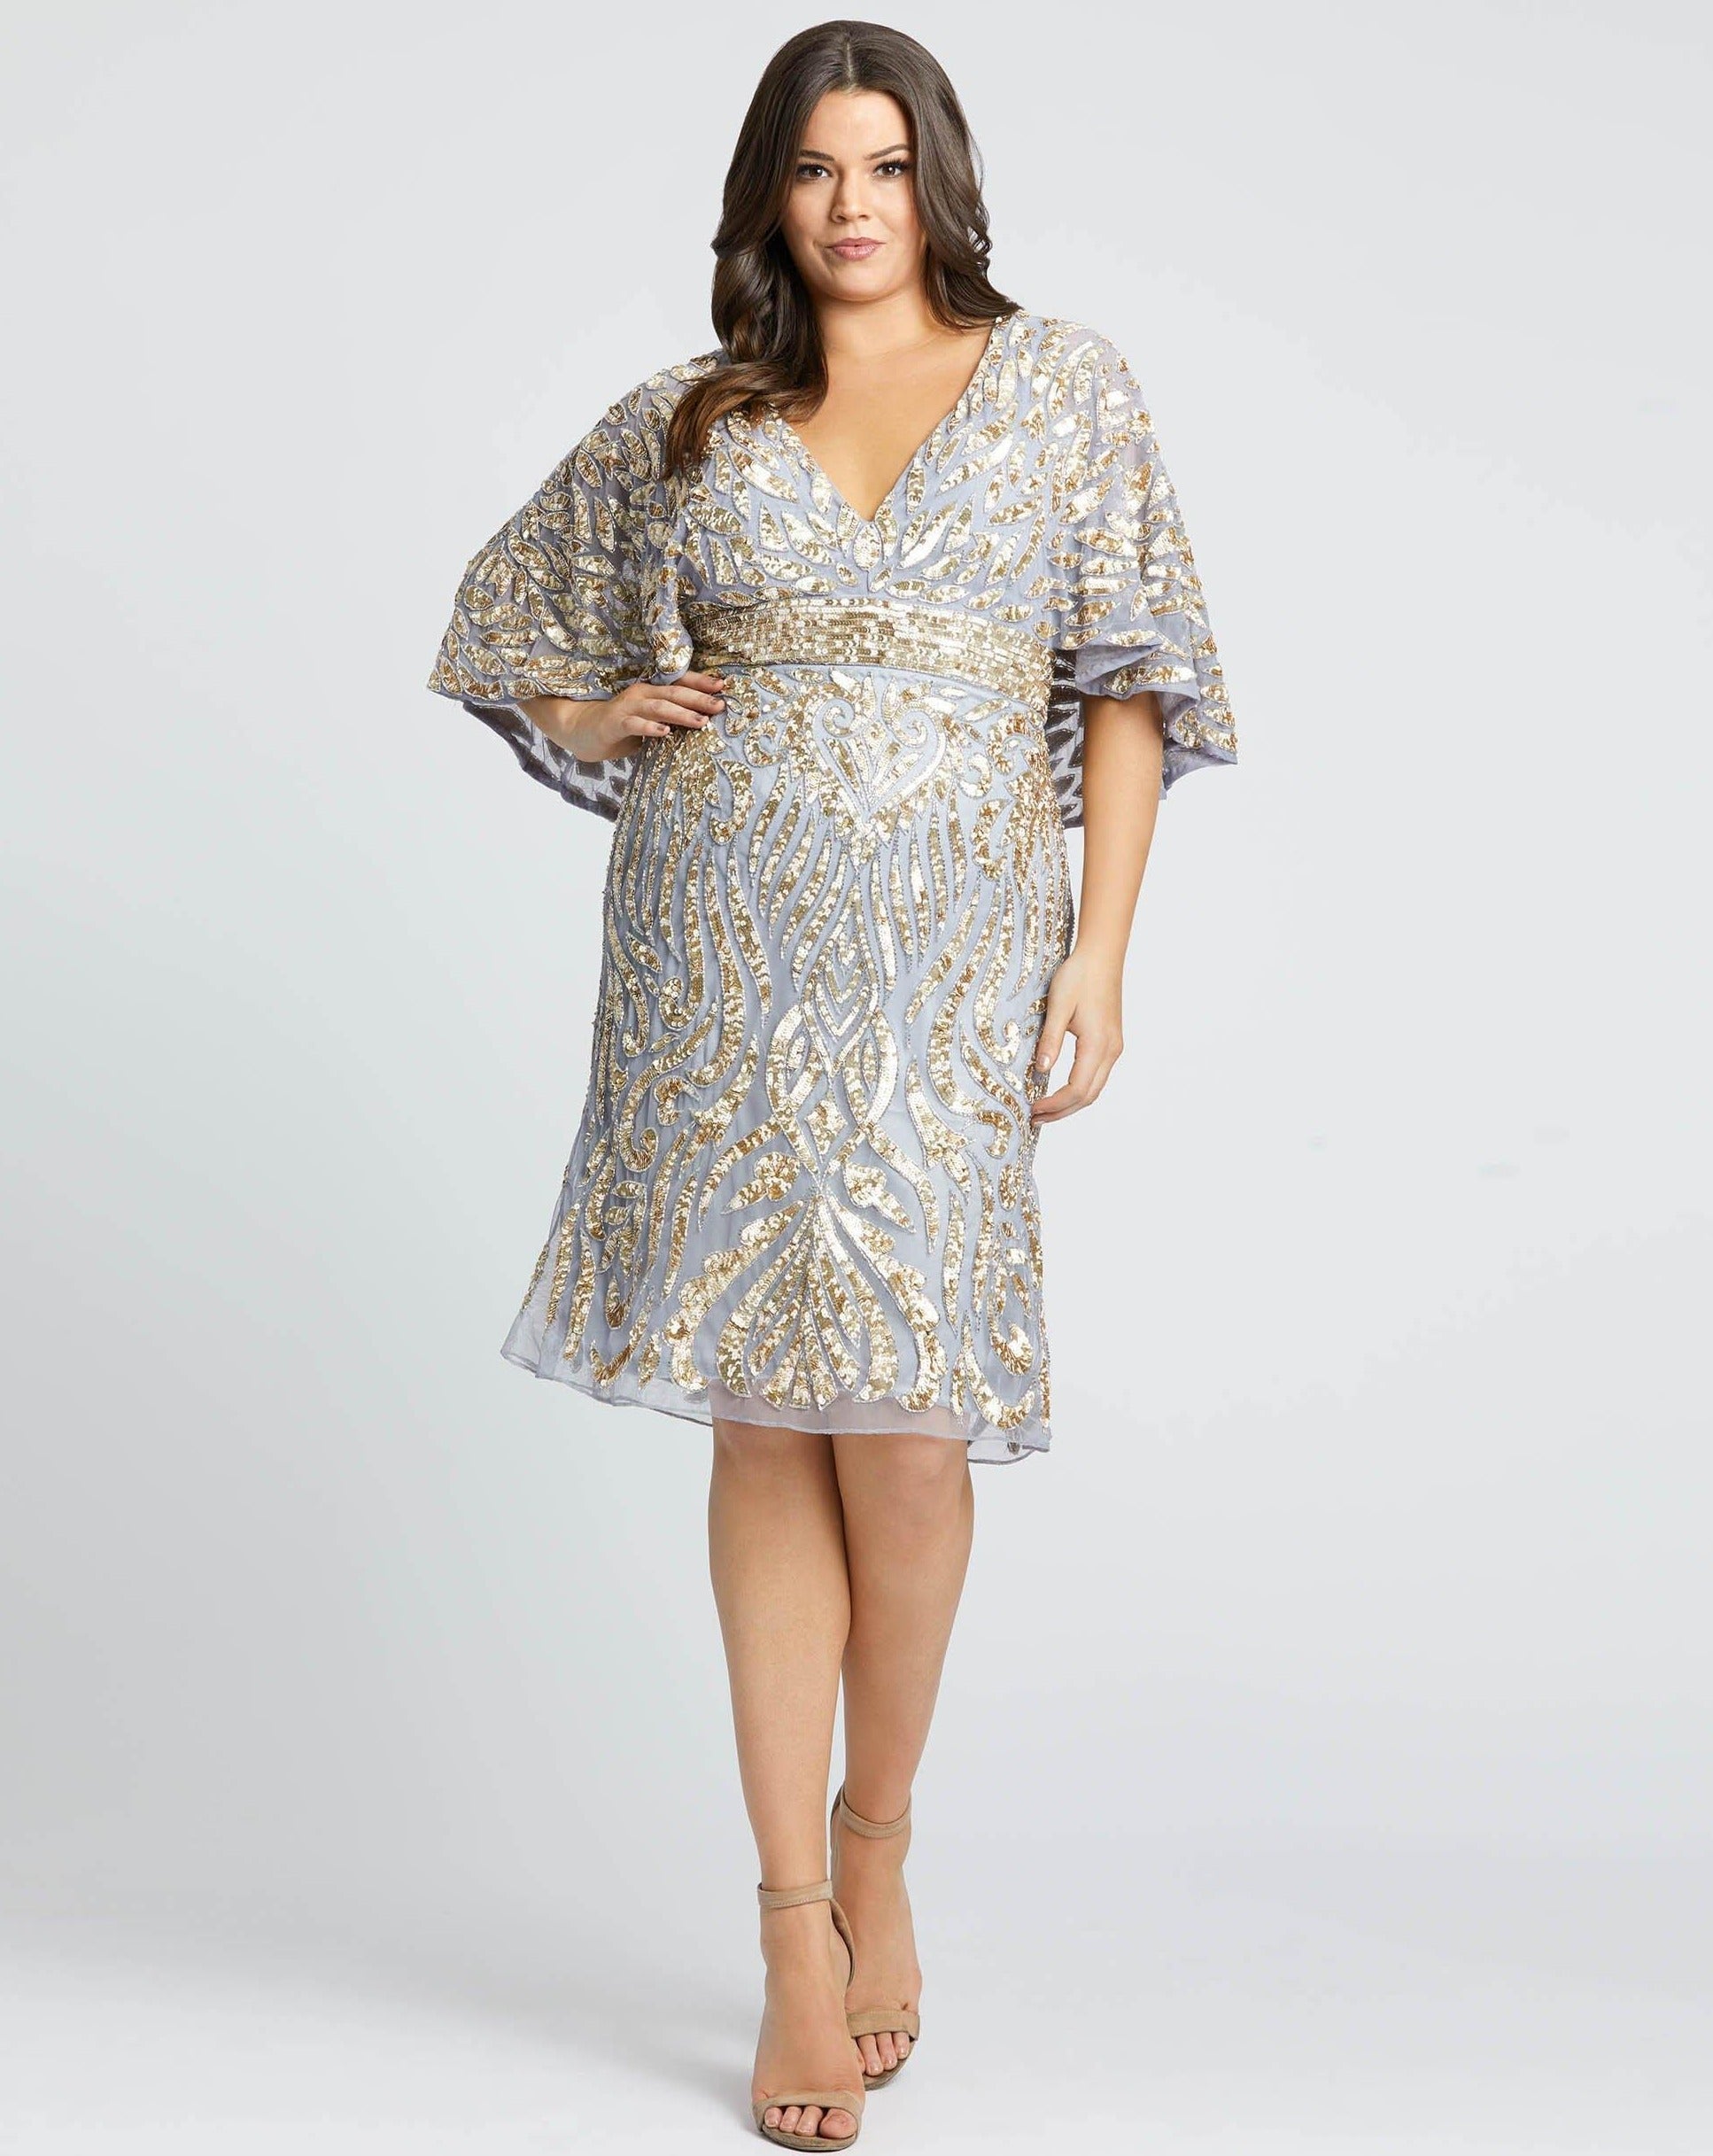 R&M Richards Women's Plus Size Short Sleeve sequin-embellished High-Low Gown 24W, Navy Gold